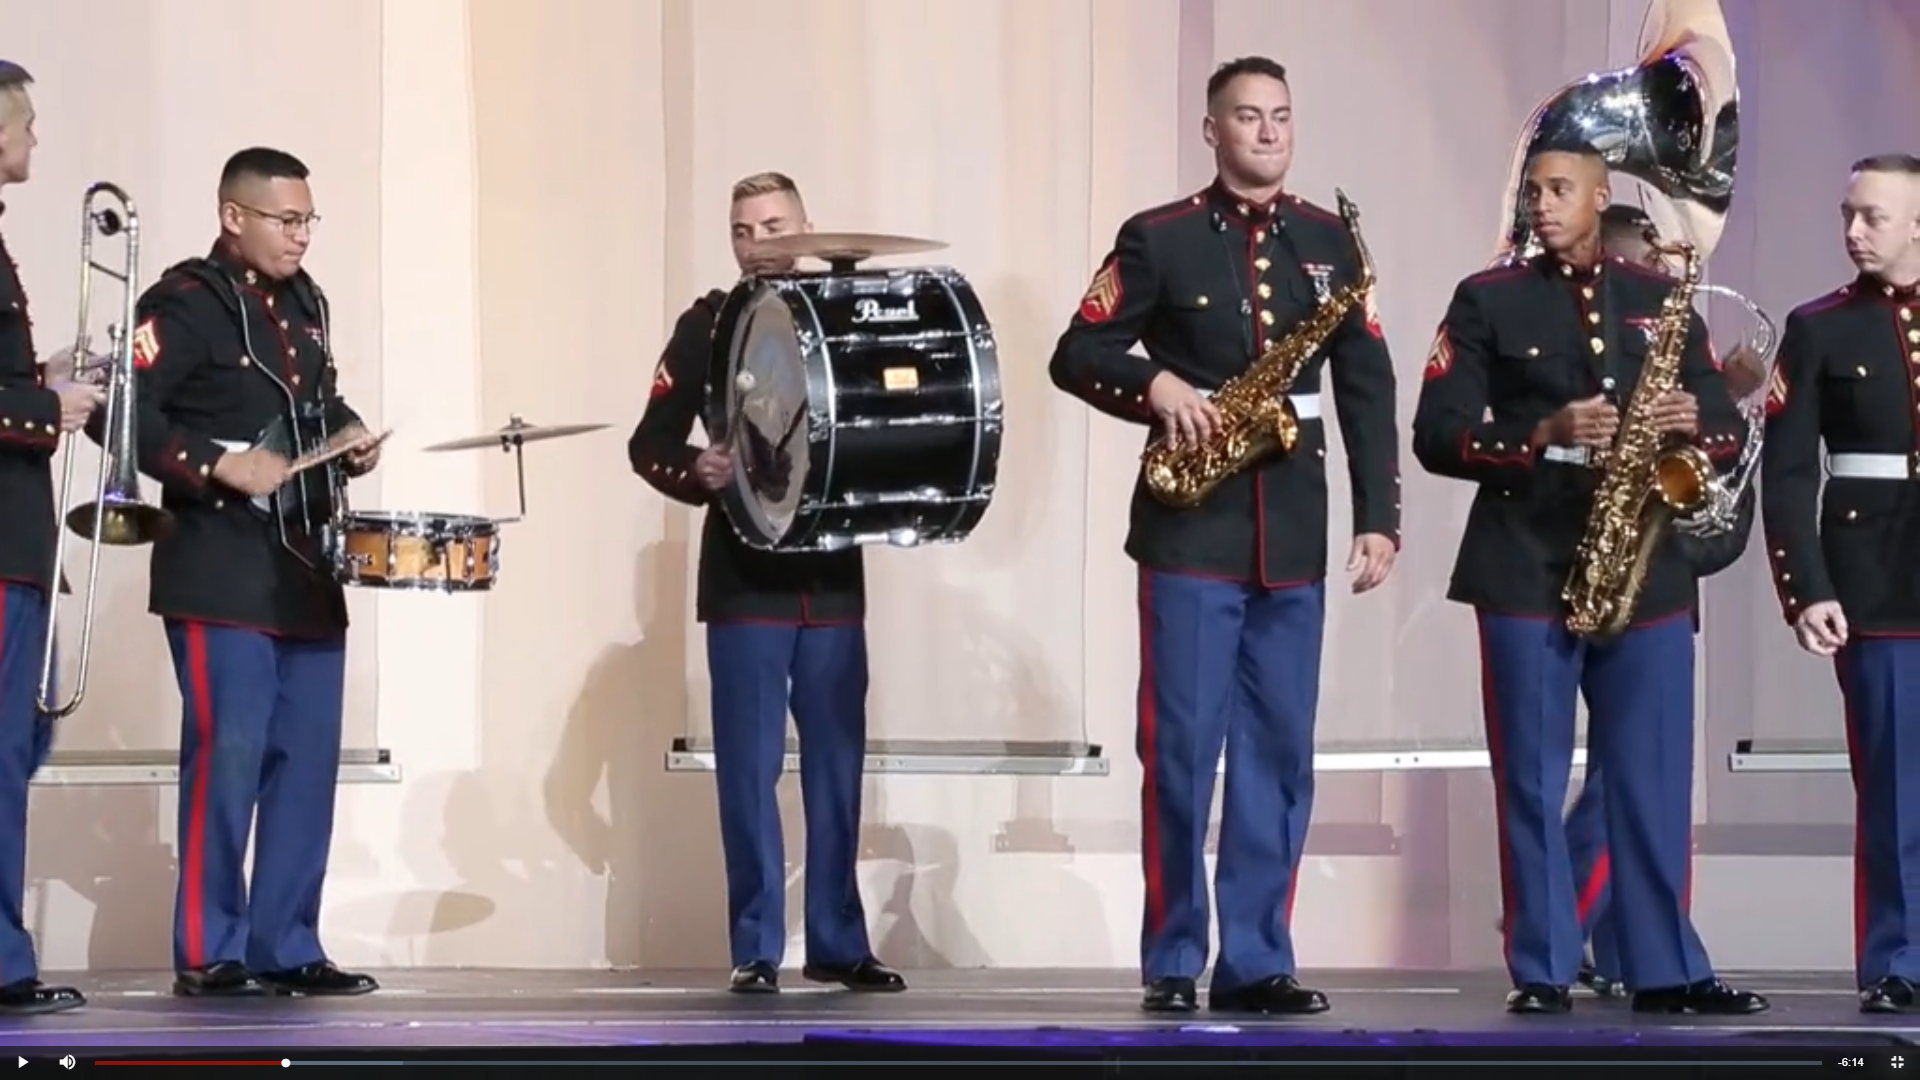 Marines perform at Bayou Classic Battle of the Bands In New Orleans, LA